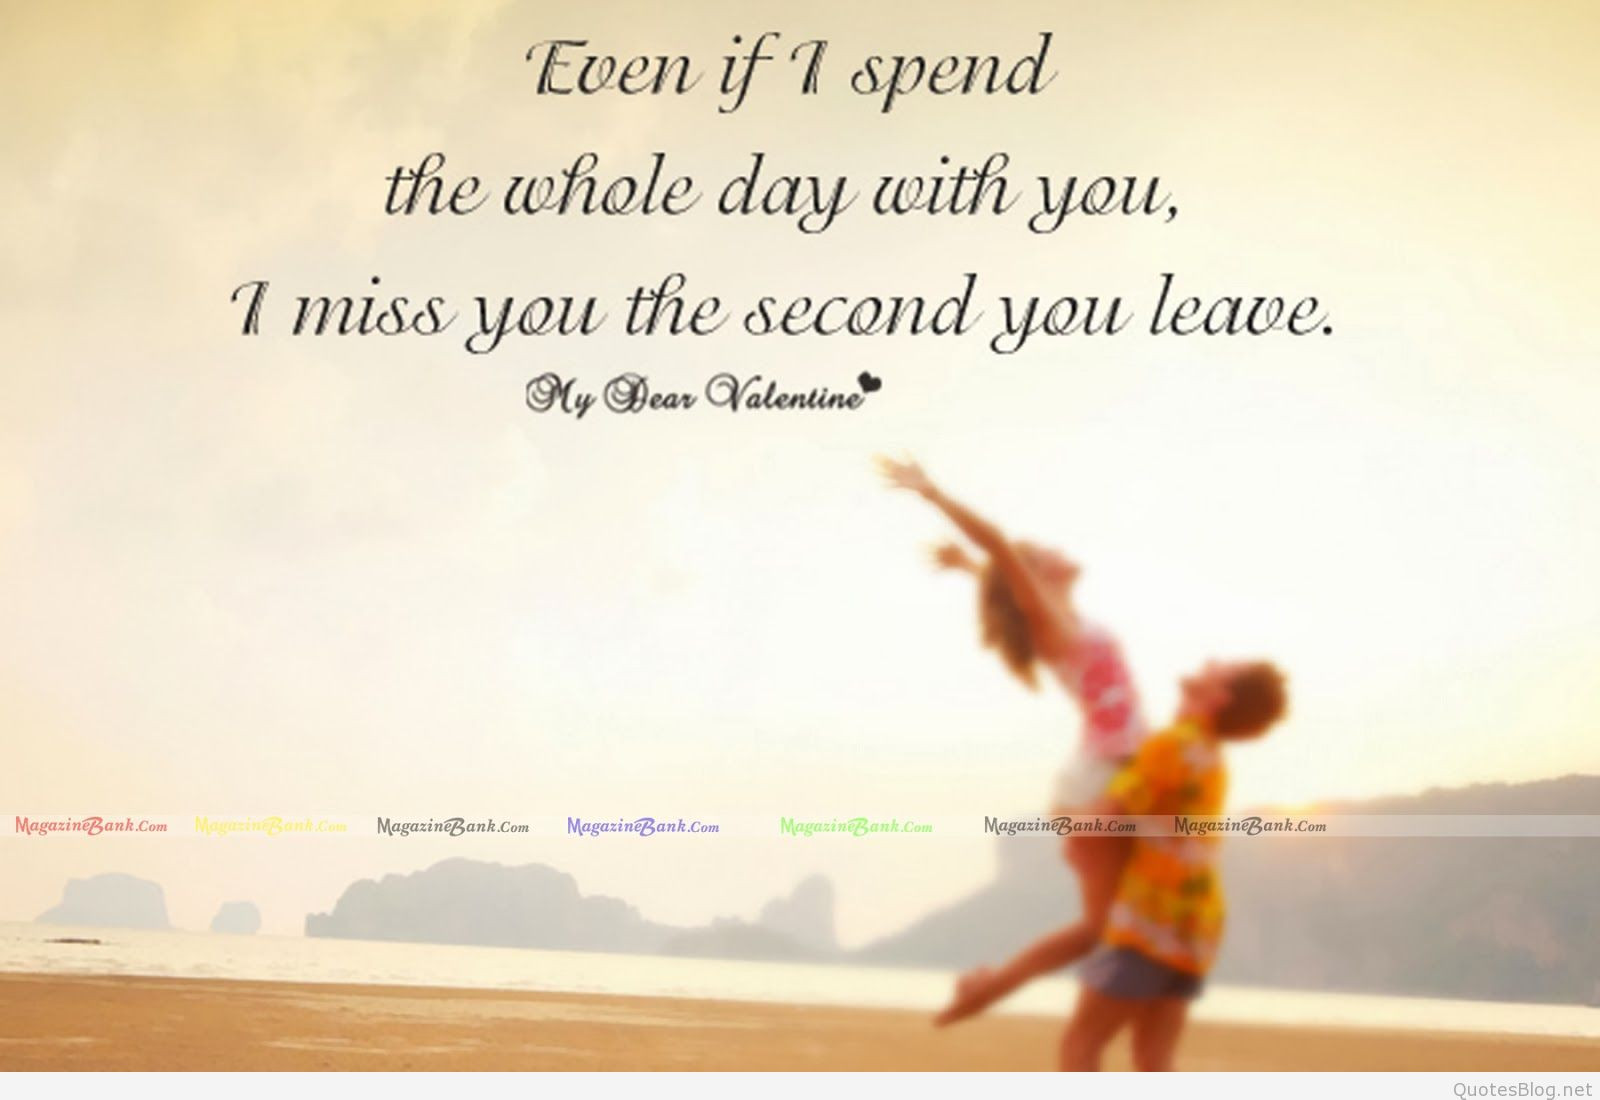 Cute Romantic Quotes For Her
 Cute love quotes images pics and sayings